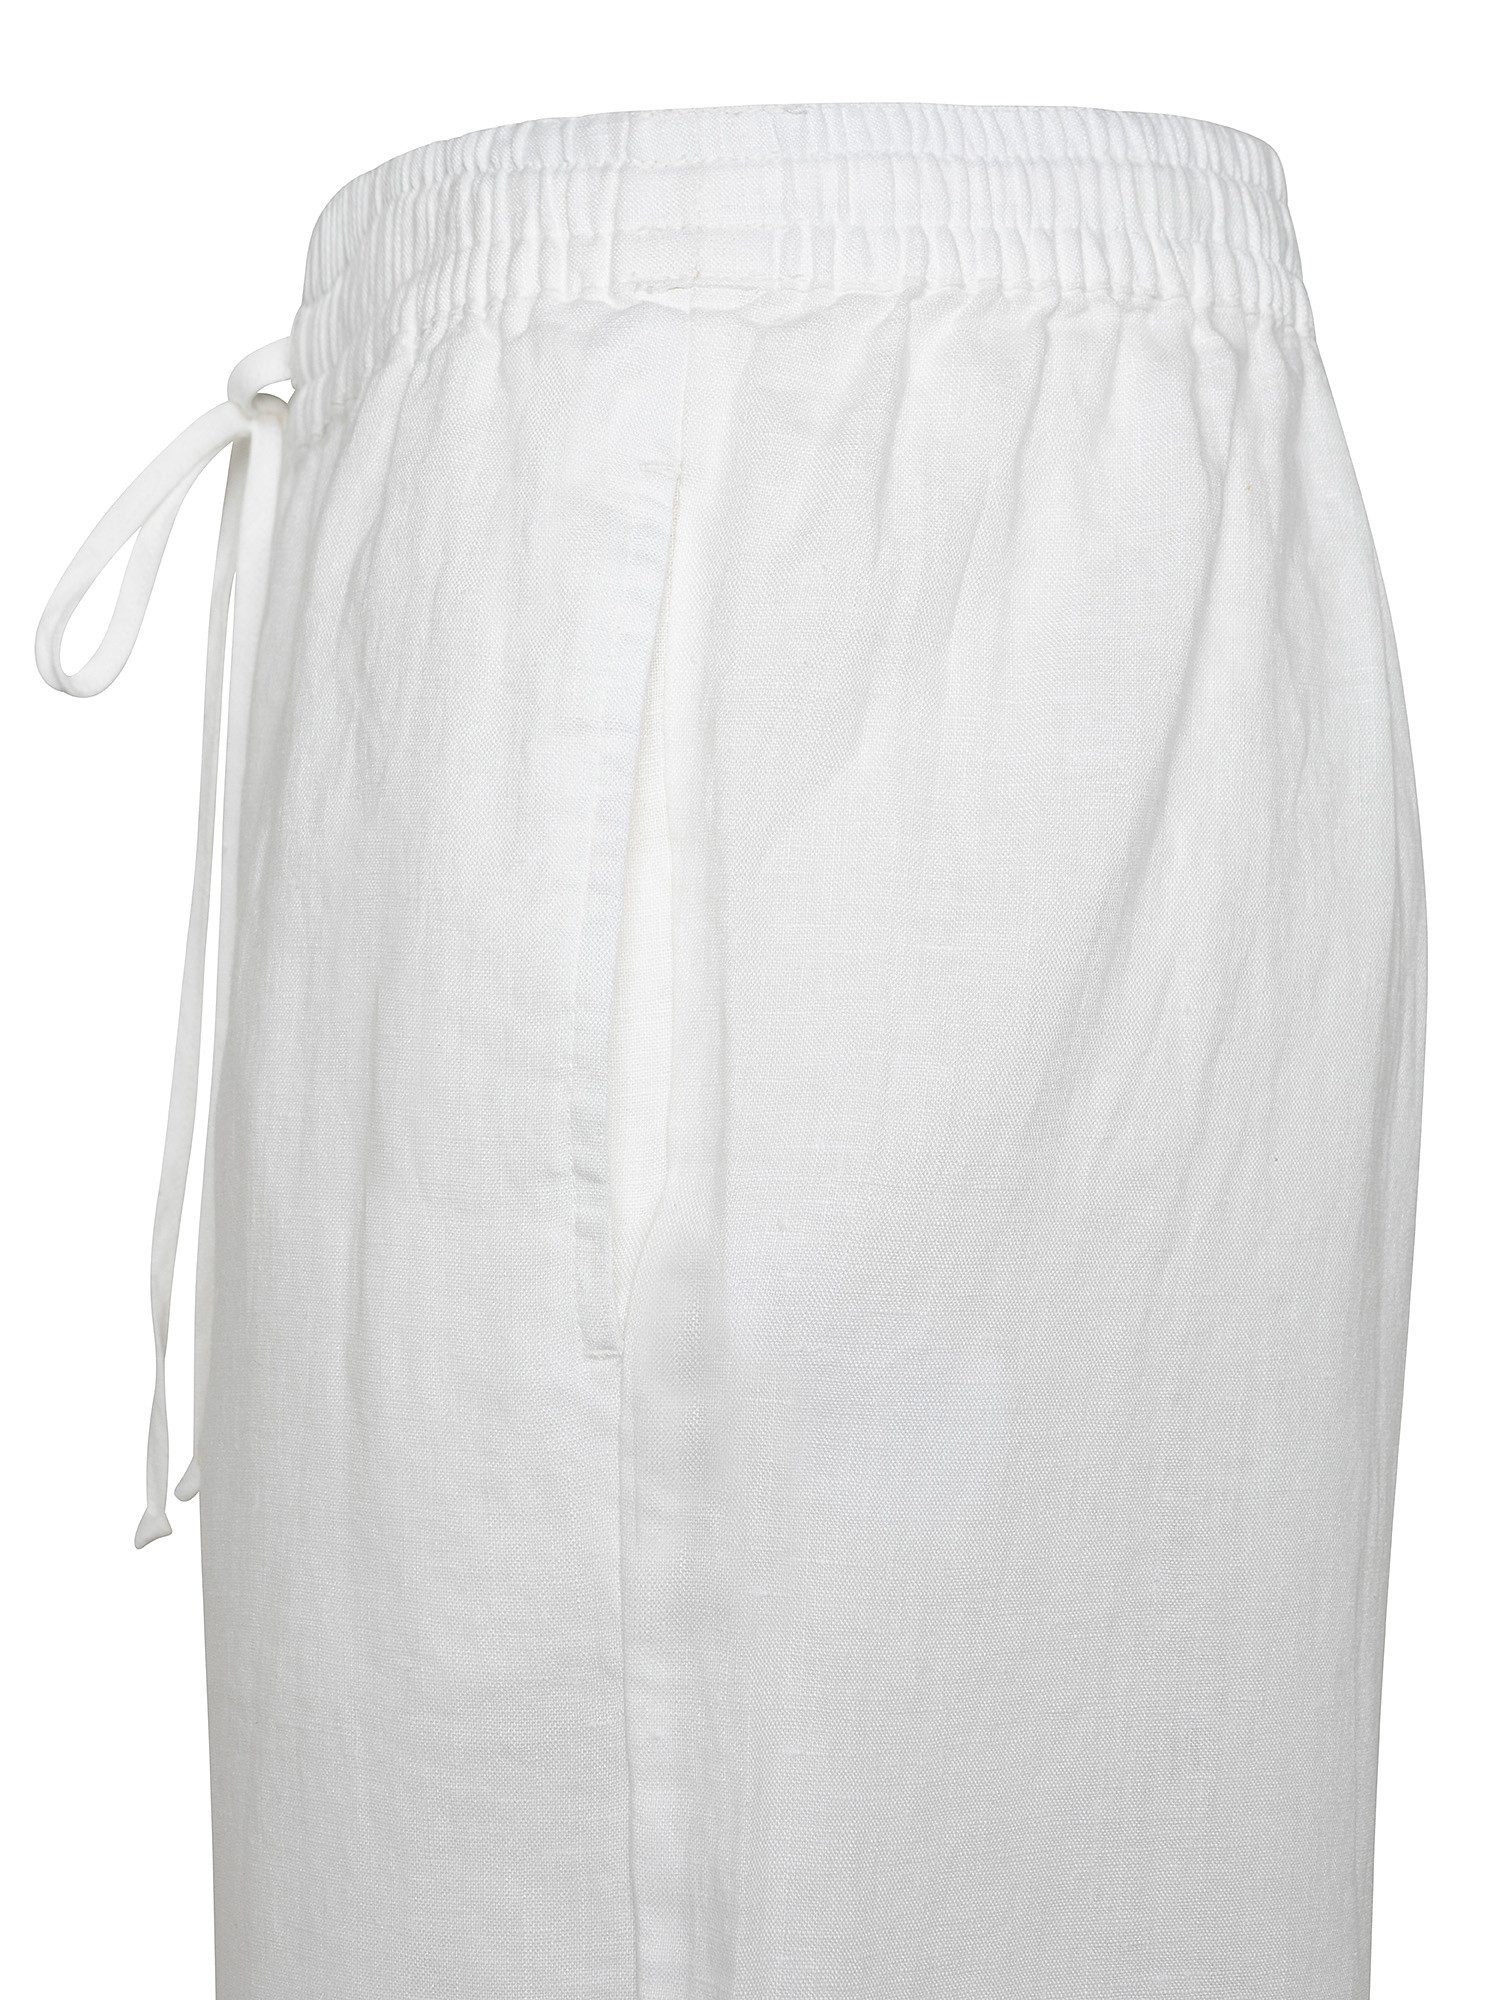 Wide leg linen trousers, White, large image number 2